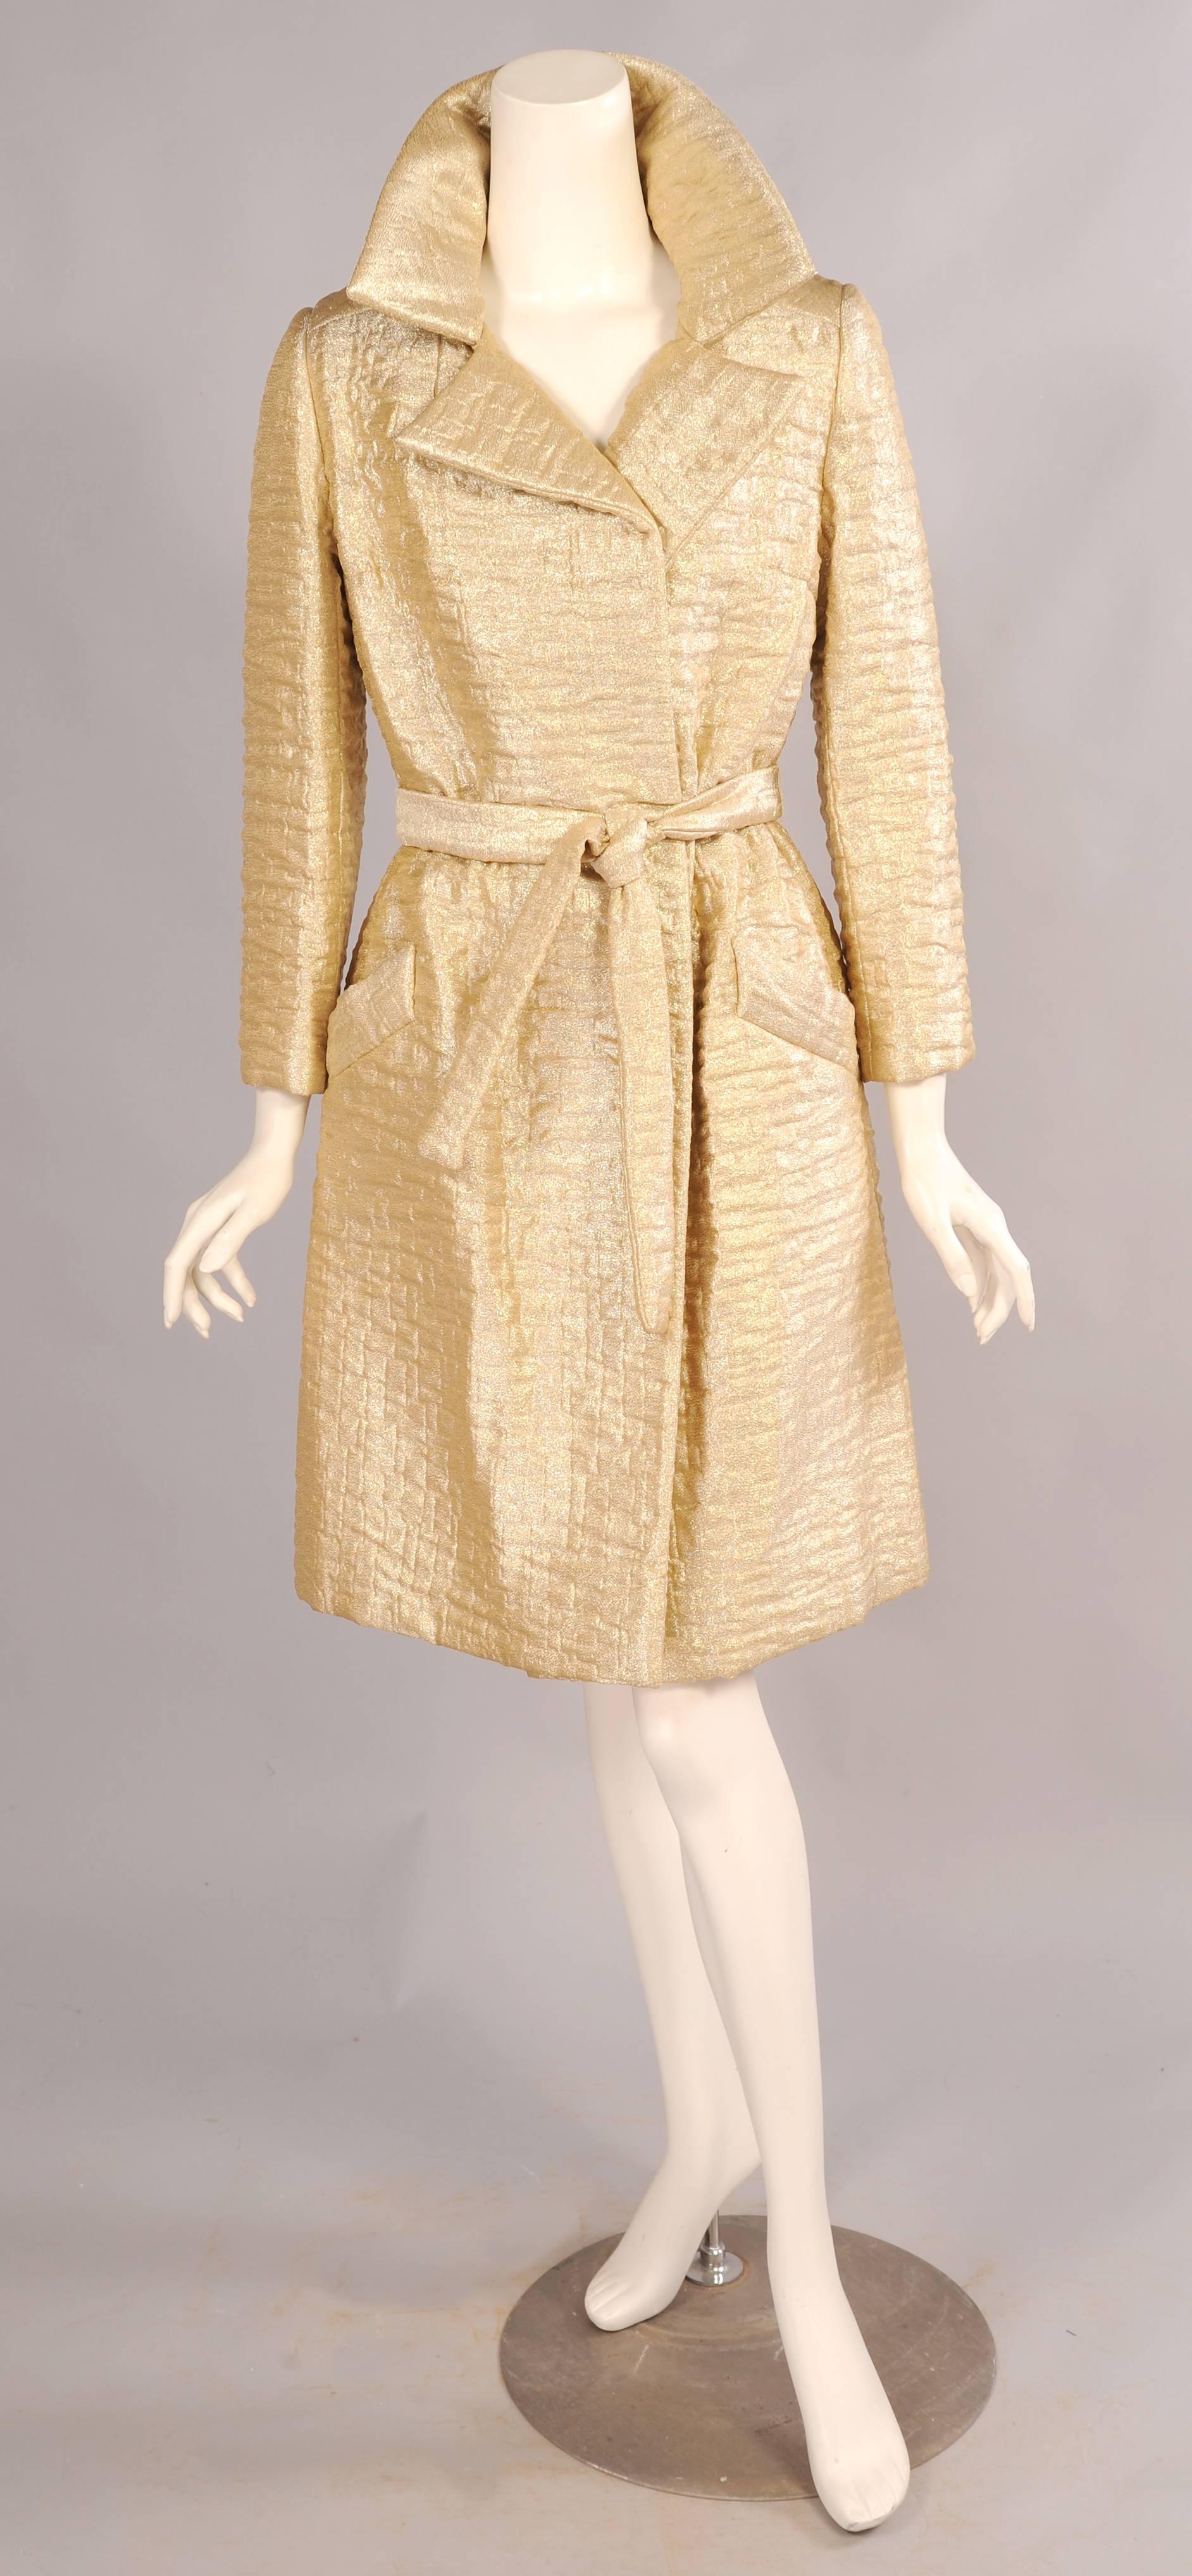 Timeless styling makes this great gold lame trench coat a perfect fit for any wardrobe. Retailed by Bonwit Teller in the 1960's the coat simply ties closed with a matching belt to accommodate a range of sizes. It is fully lined and in excellent